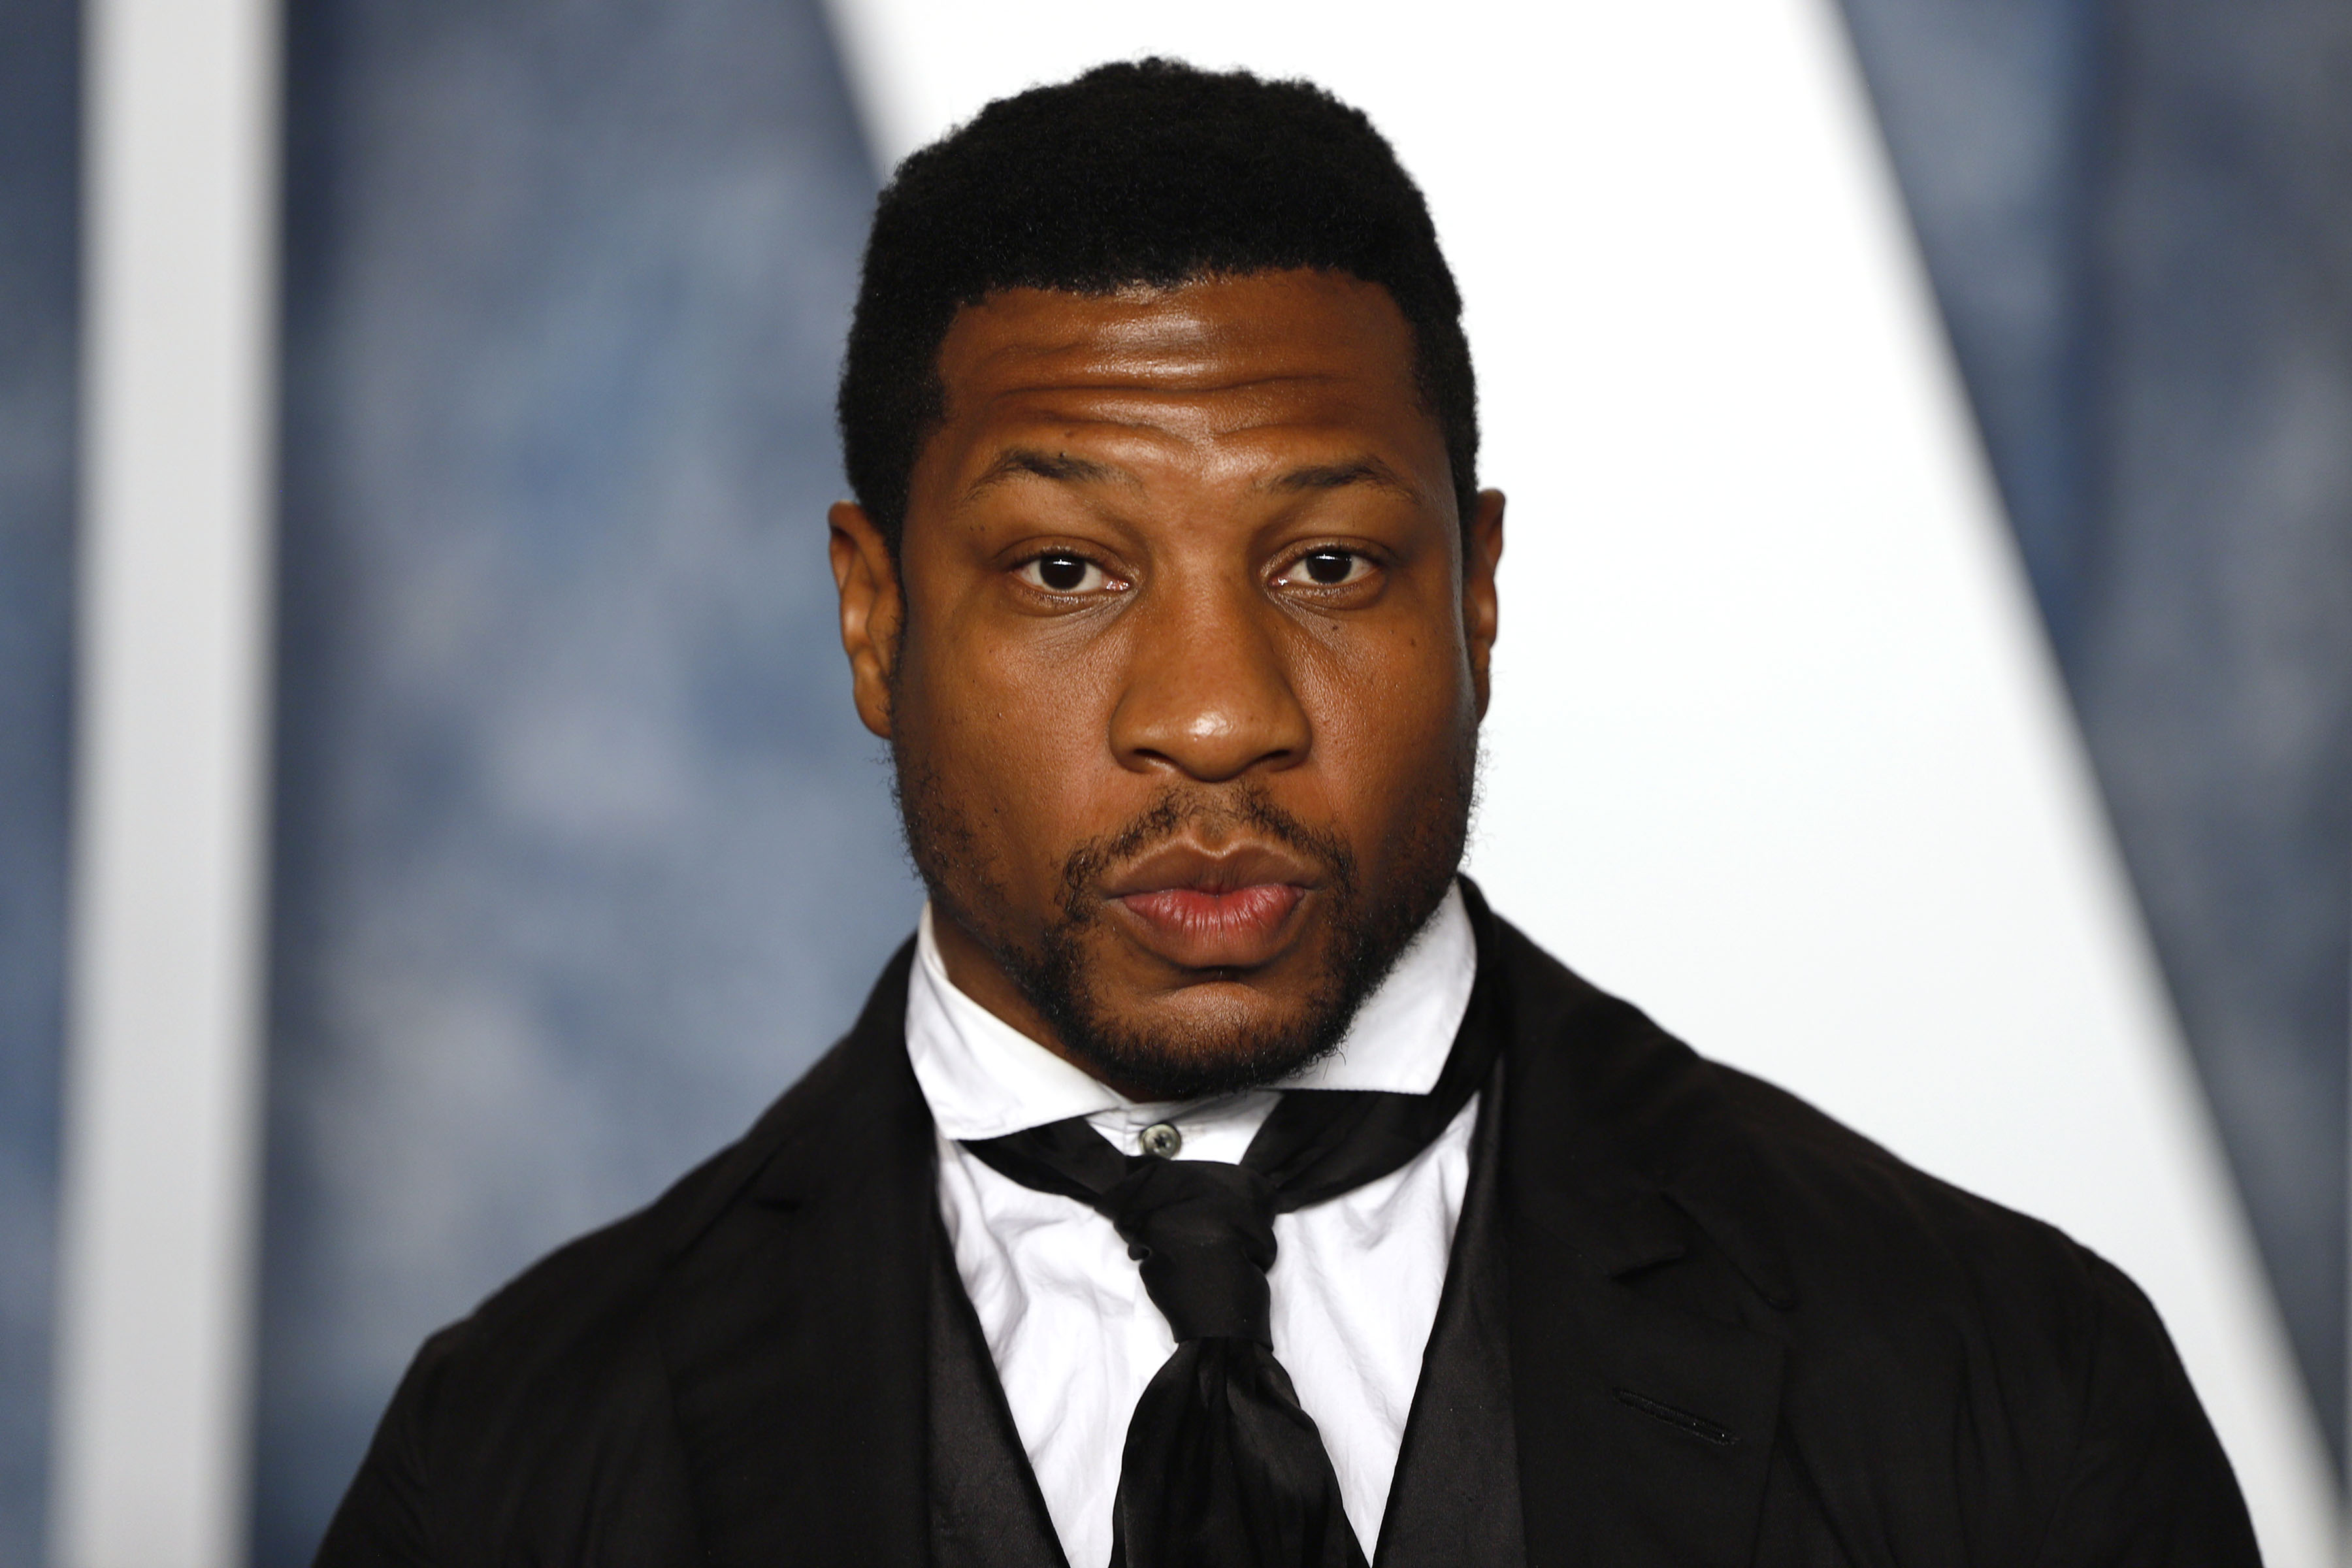 Jonathan Majors at Wallis Annenberg Center for the Performing Arts on March 12, 2023, in Beverly Hills, California. | Source: Getty Images